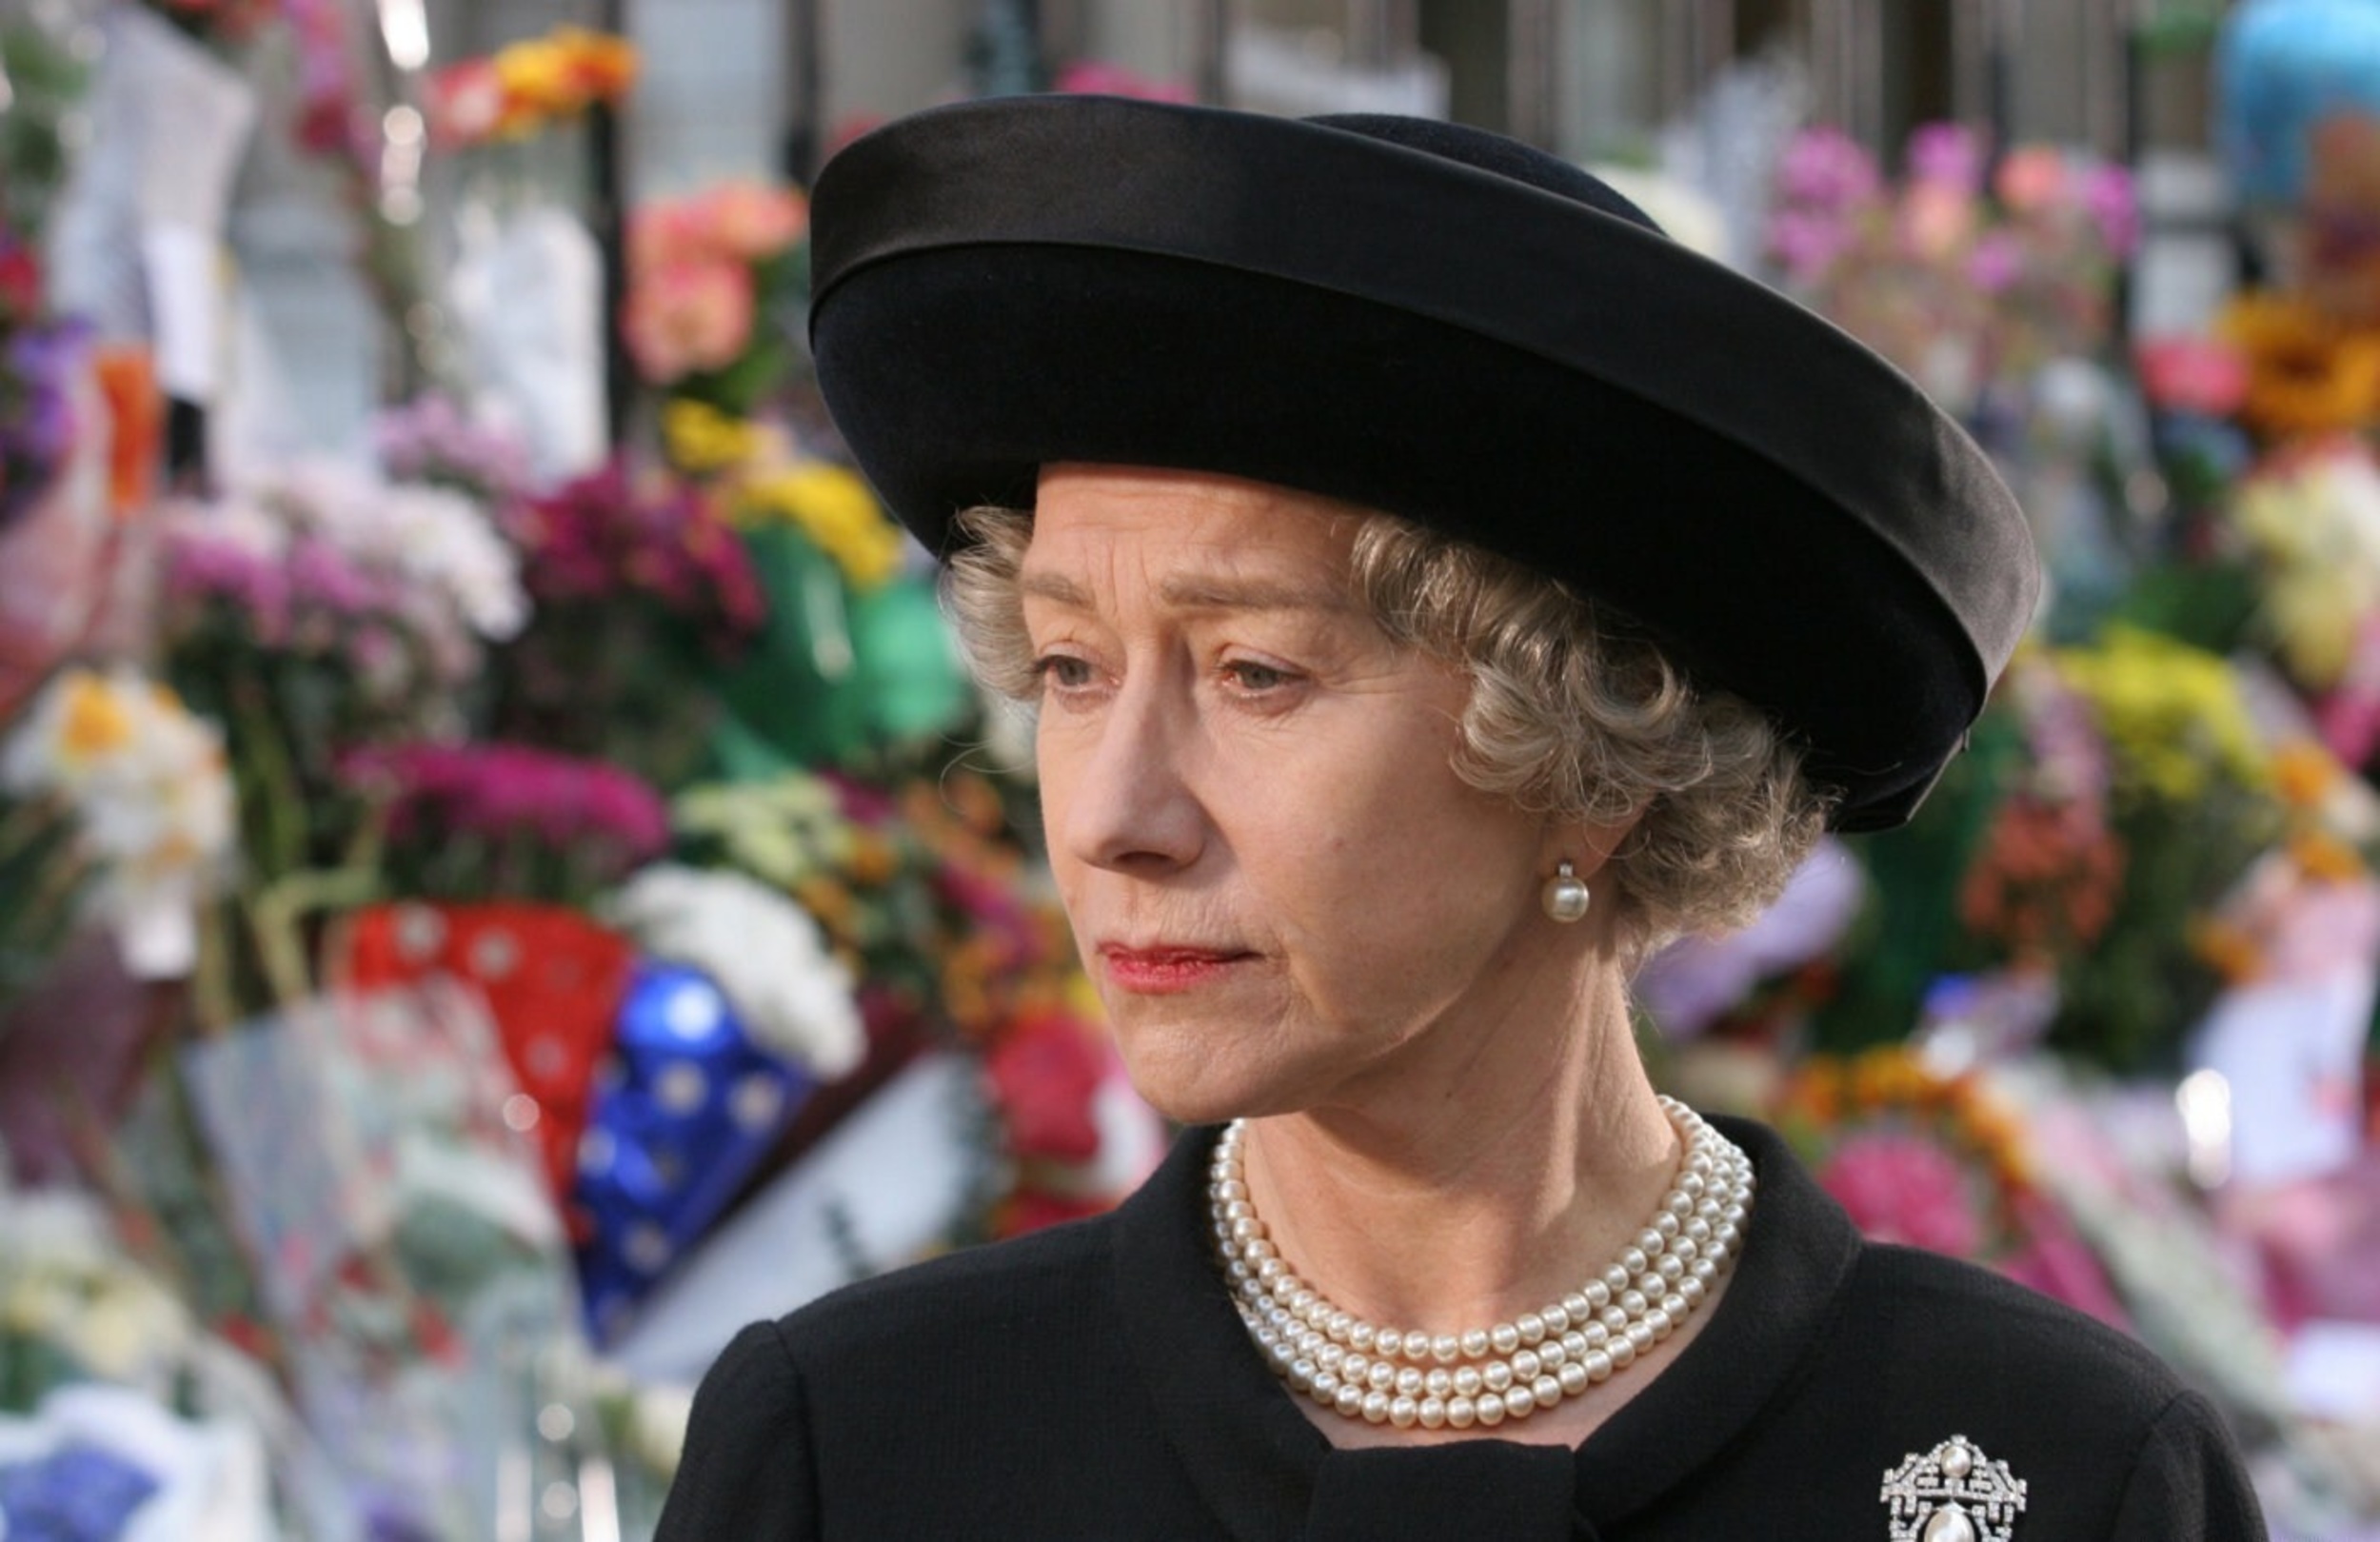 <p>Elizabeth II was Queen of England for decades before her September 2022 death at 96. She witnessed a lot, including the death of her one-time daughter-in-law Diana Spencer. <em>The Queen</em> is one of writer Peter Morgan’s explorations of British royalty, but this one had Helen Mirren at the center. Mirren won Best Actress for playing Elizabeth.</p><p>You may also like: <a href='https://www.yardbarker.com/entertainment/articles/24_movies_that_perfectly_showcase_teen_angst_031324/s1__39082518'>24 movies that perfectly showcase teen angst</a></p>